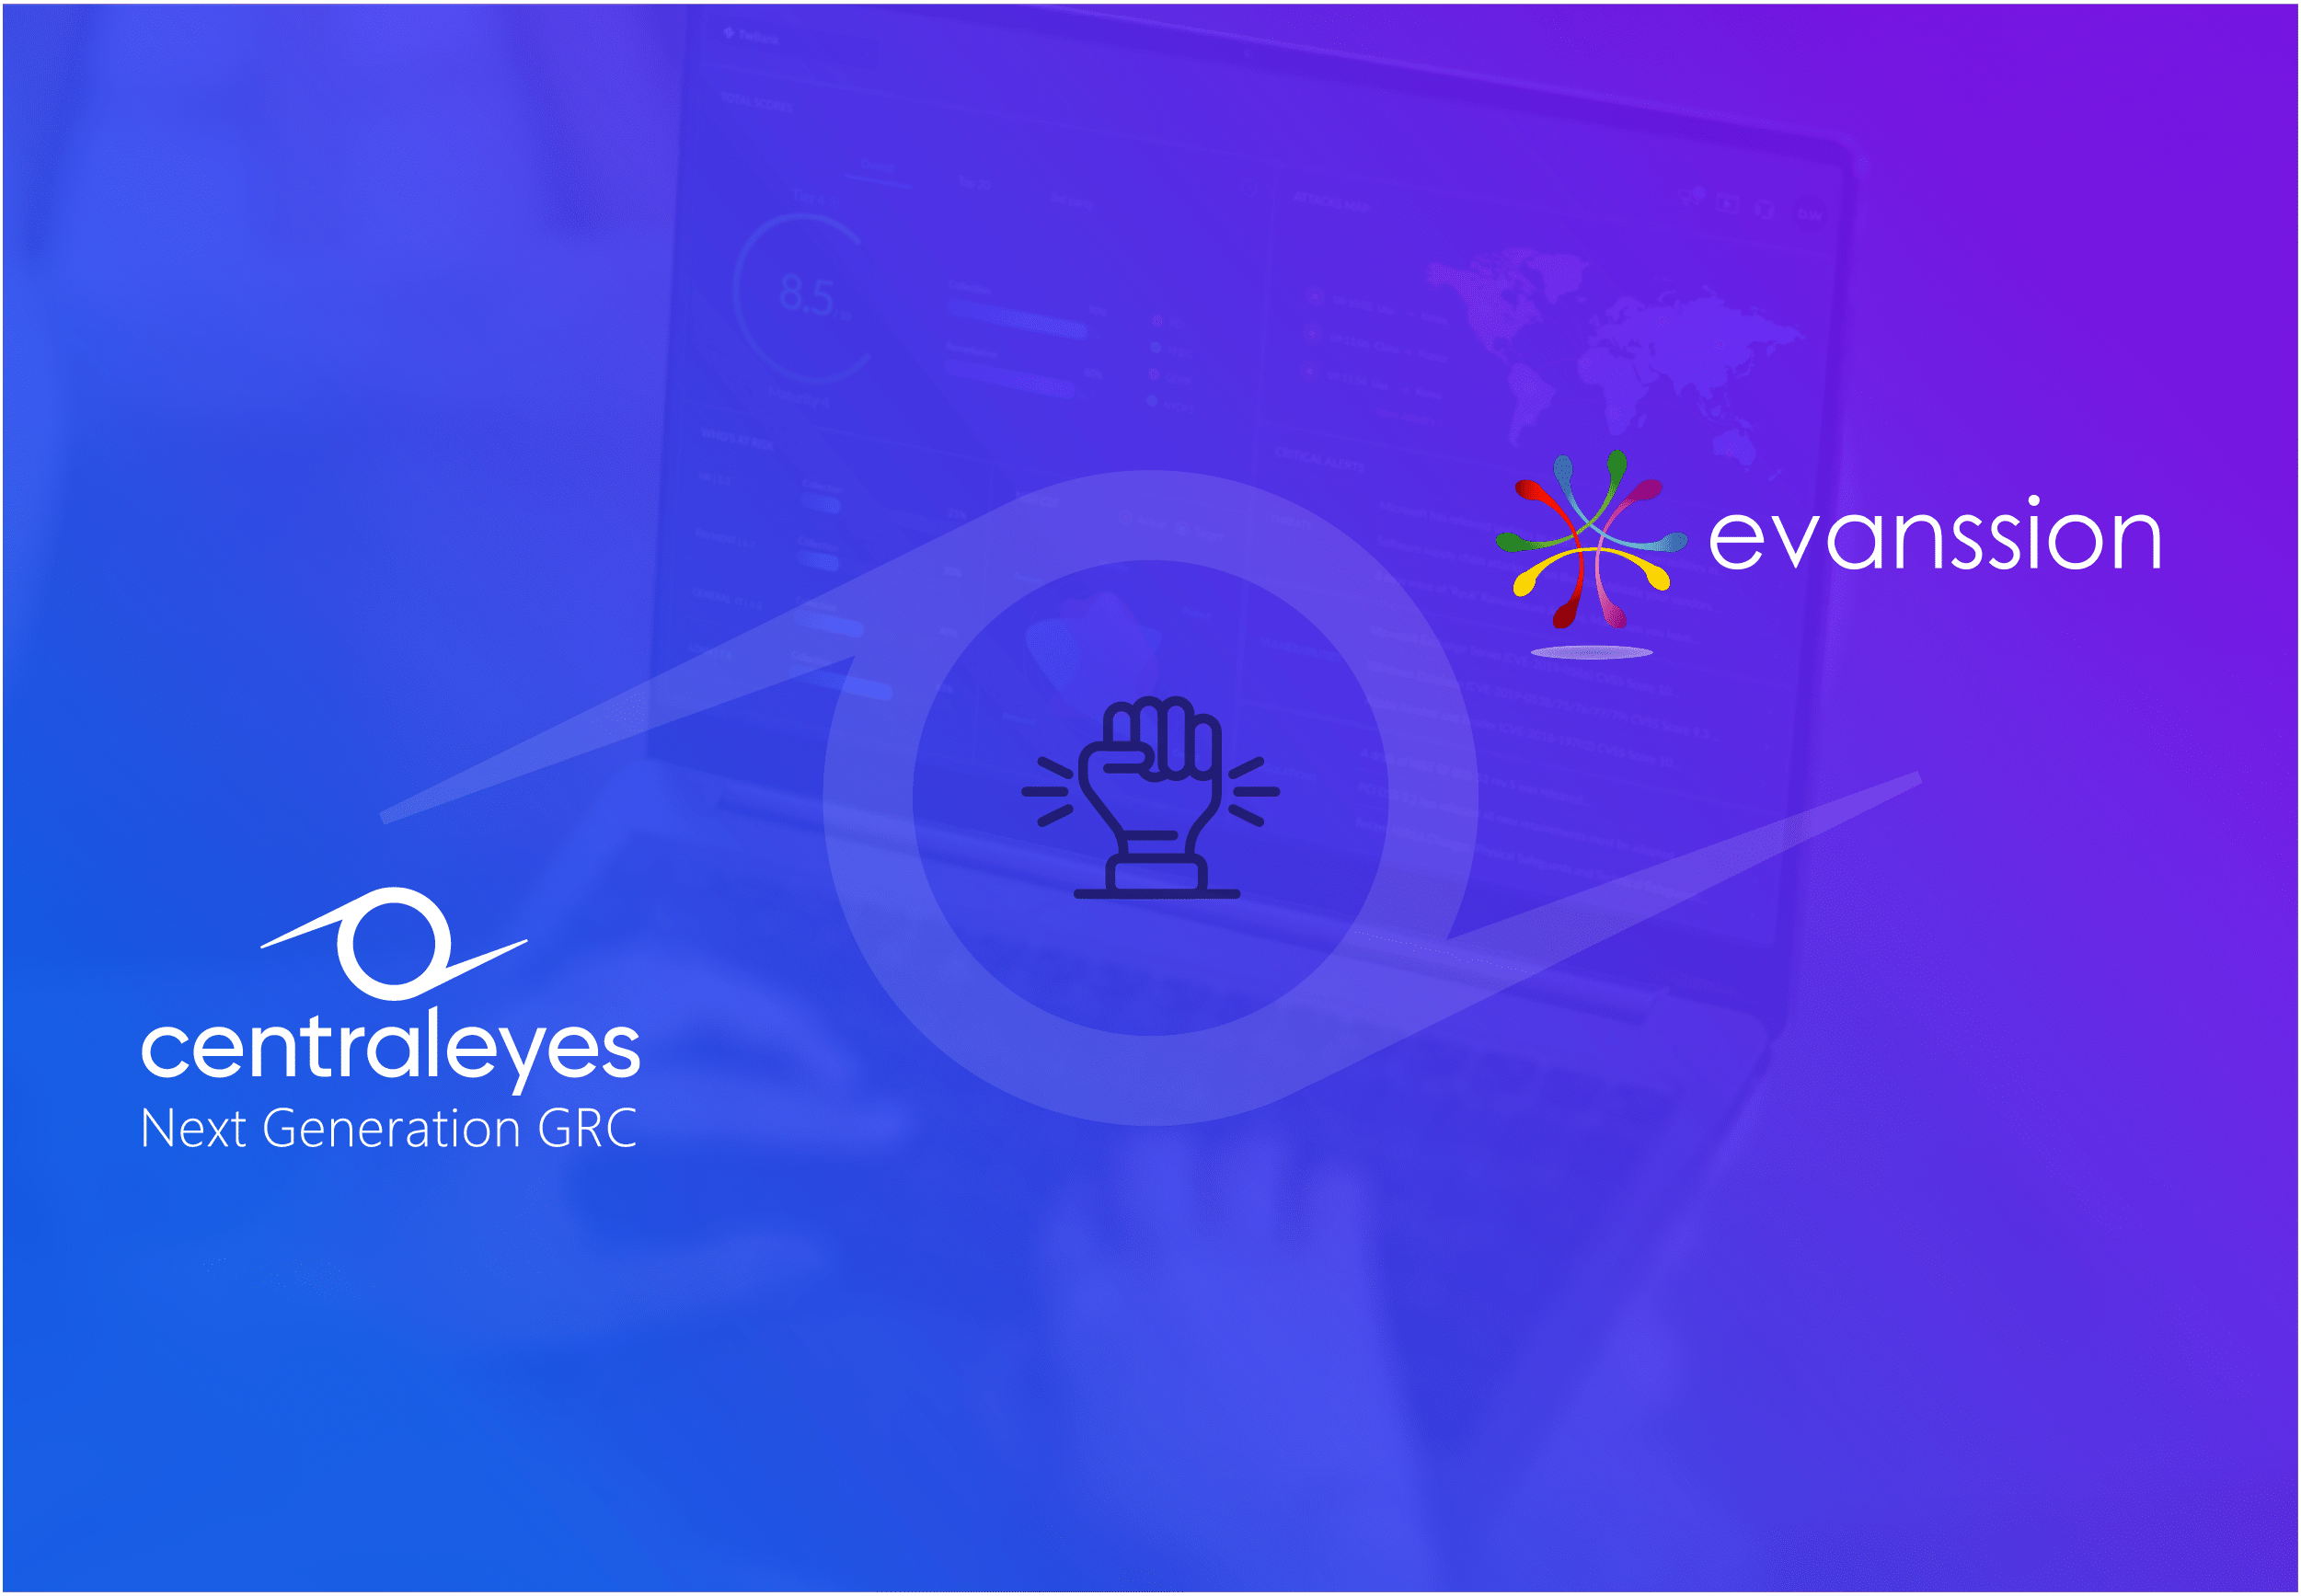 Centraleyes Partners with UAE-based distributor, Evanssion, to bring local presence in a key market as part of its global expansion plans  